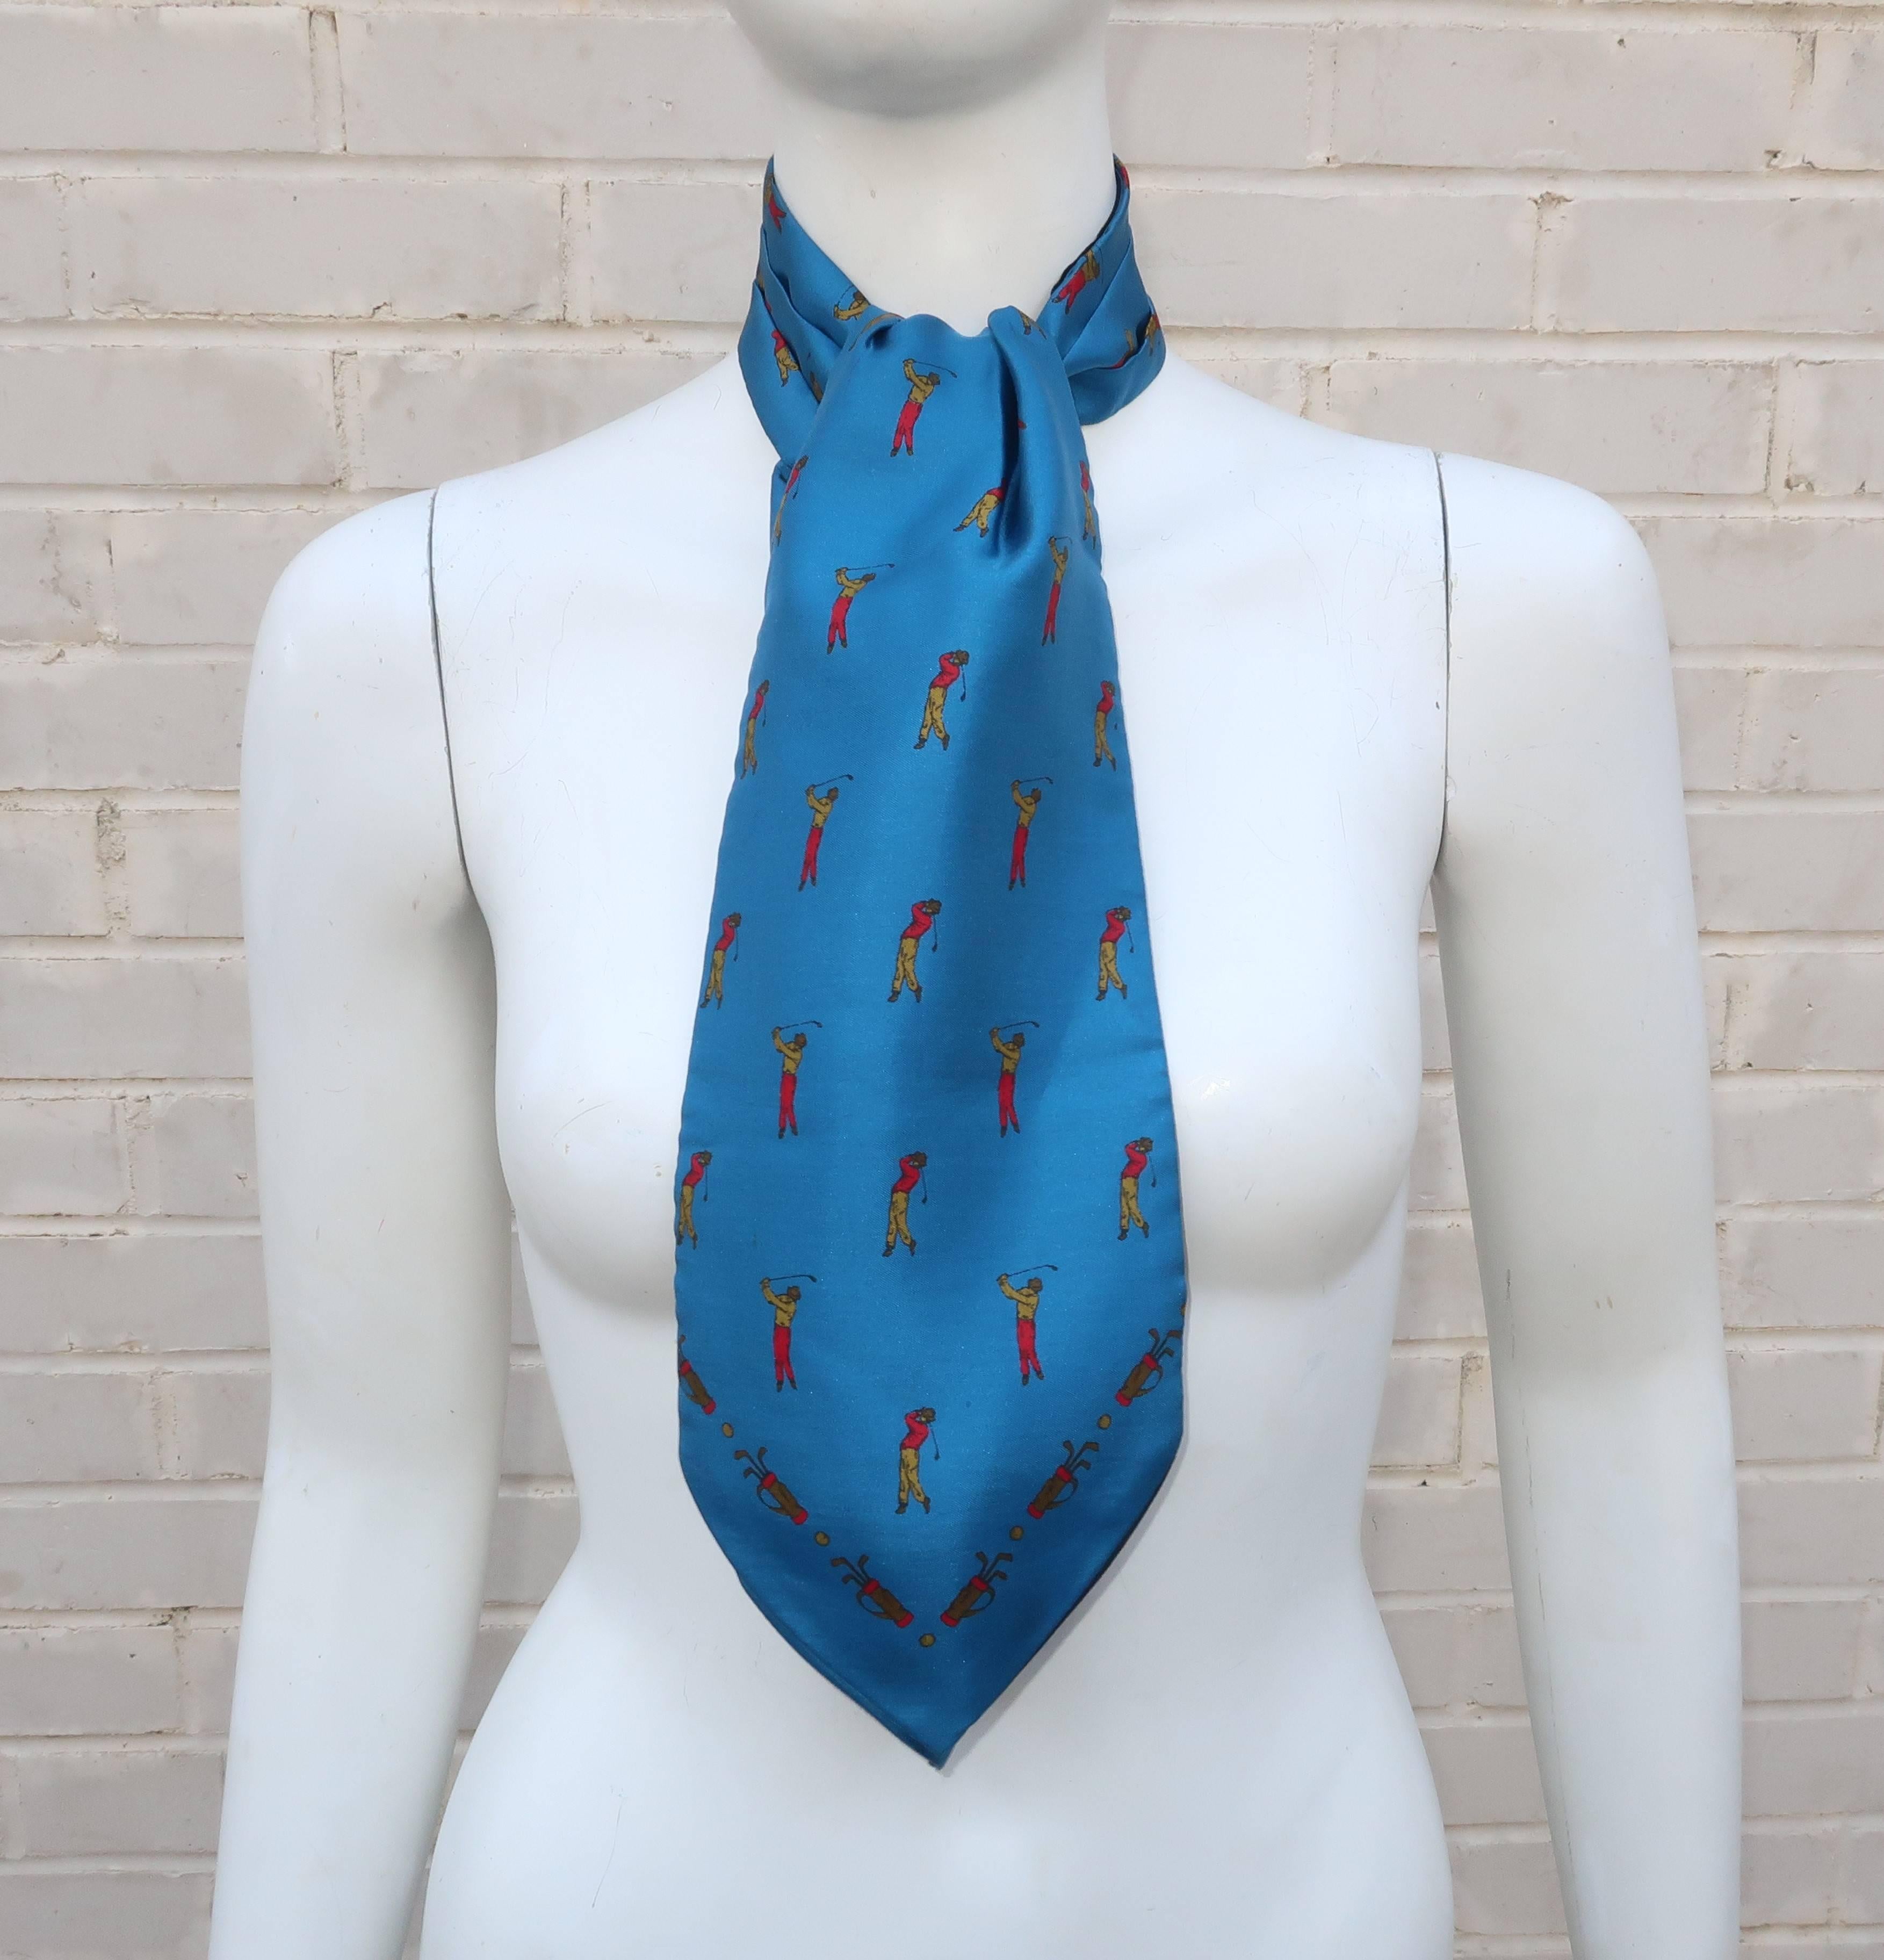 What should every well dressed man wear to the golf course?  An all silk Italian ascot by Ashear, of course!  This reversible ascot tie features golfers, clubs and balls in shades of red, goldenrod, yellow and gray on a brilliant blue background or